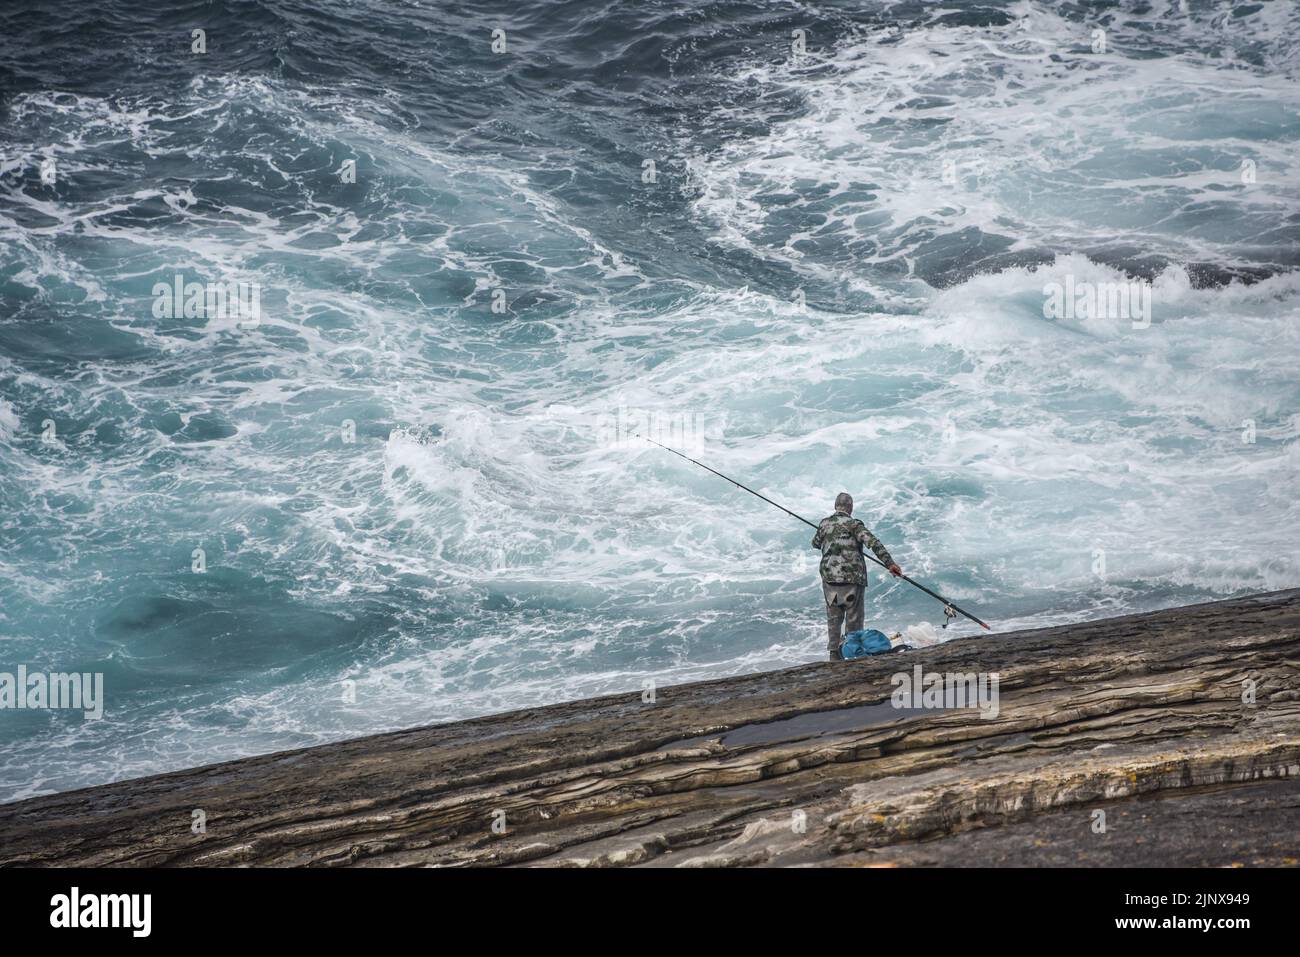 A man fishing off the Cantabrian coast in the Basque Country. San Sebastian, Spain Stock Photo